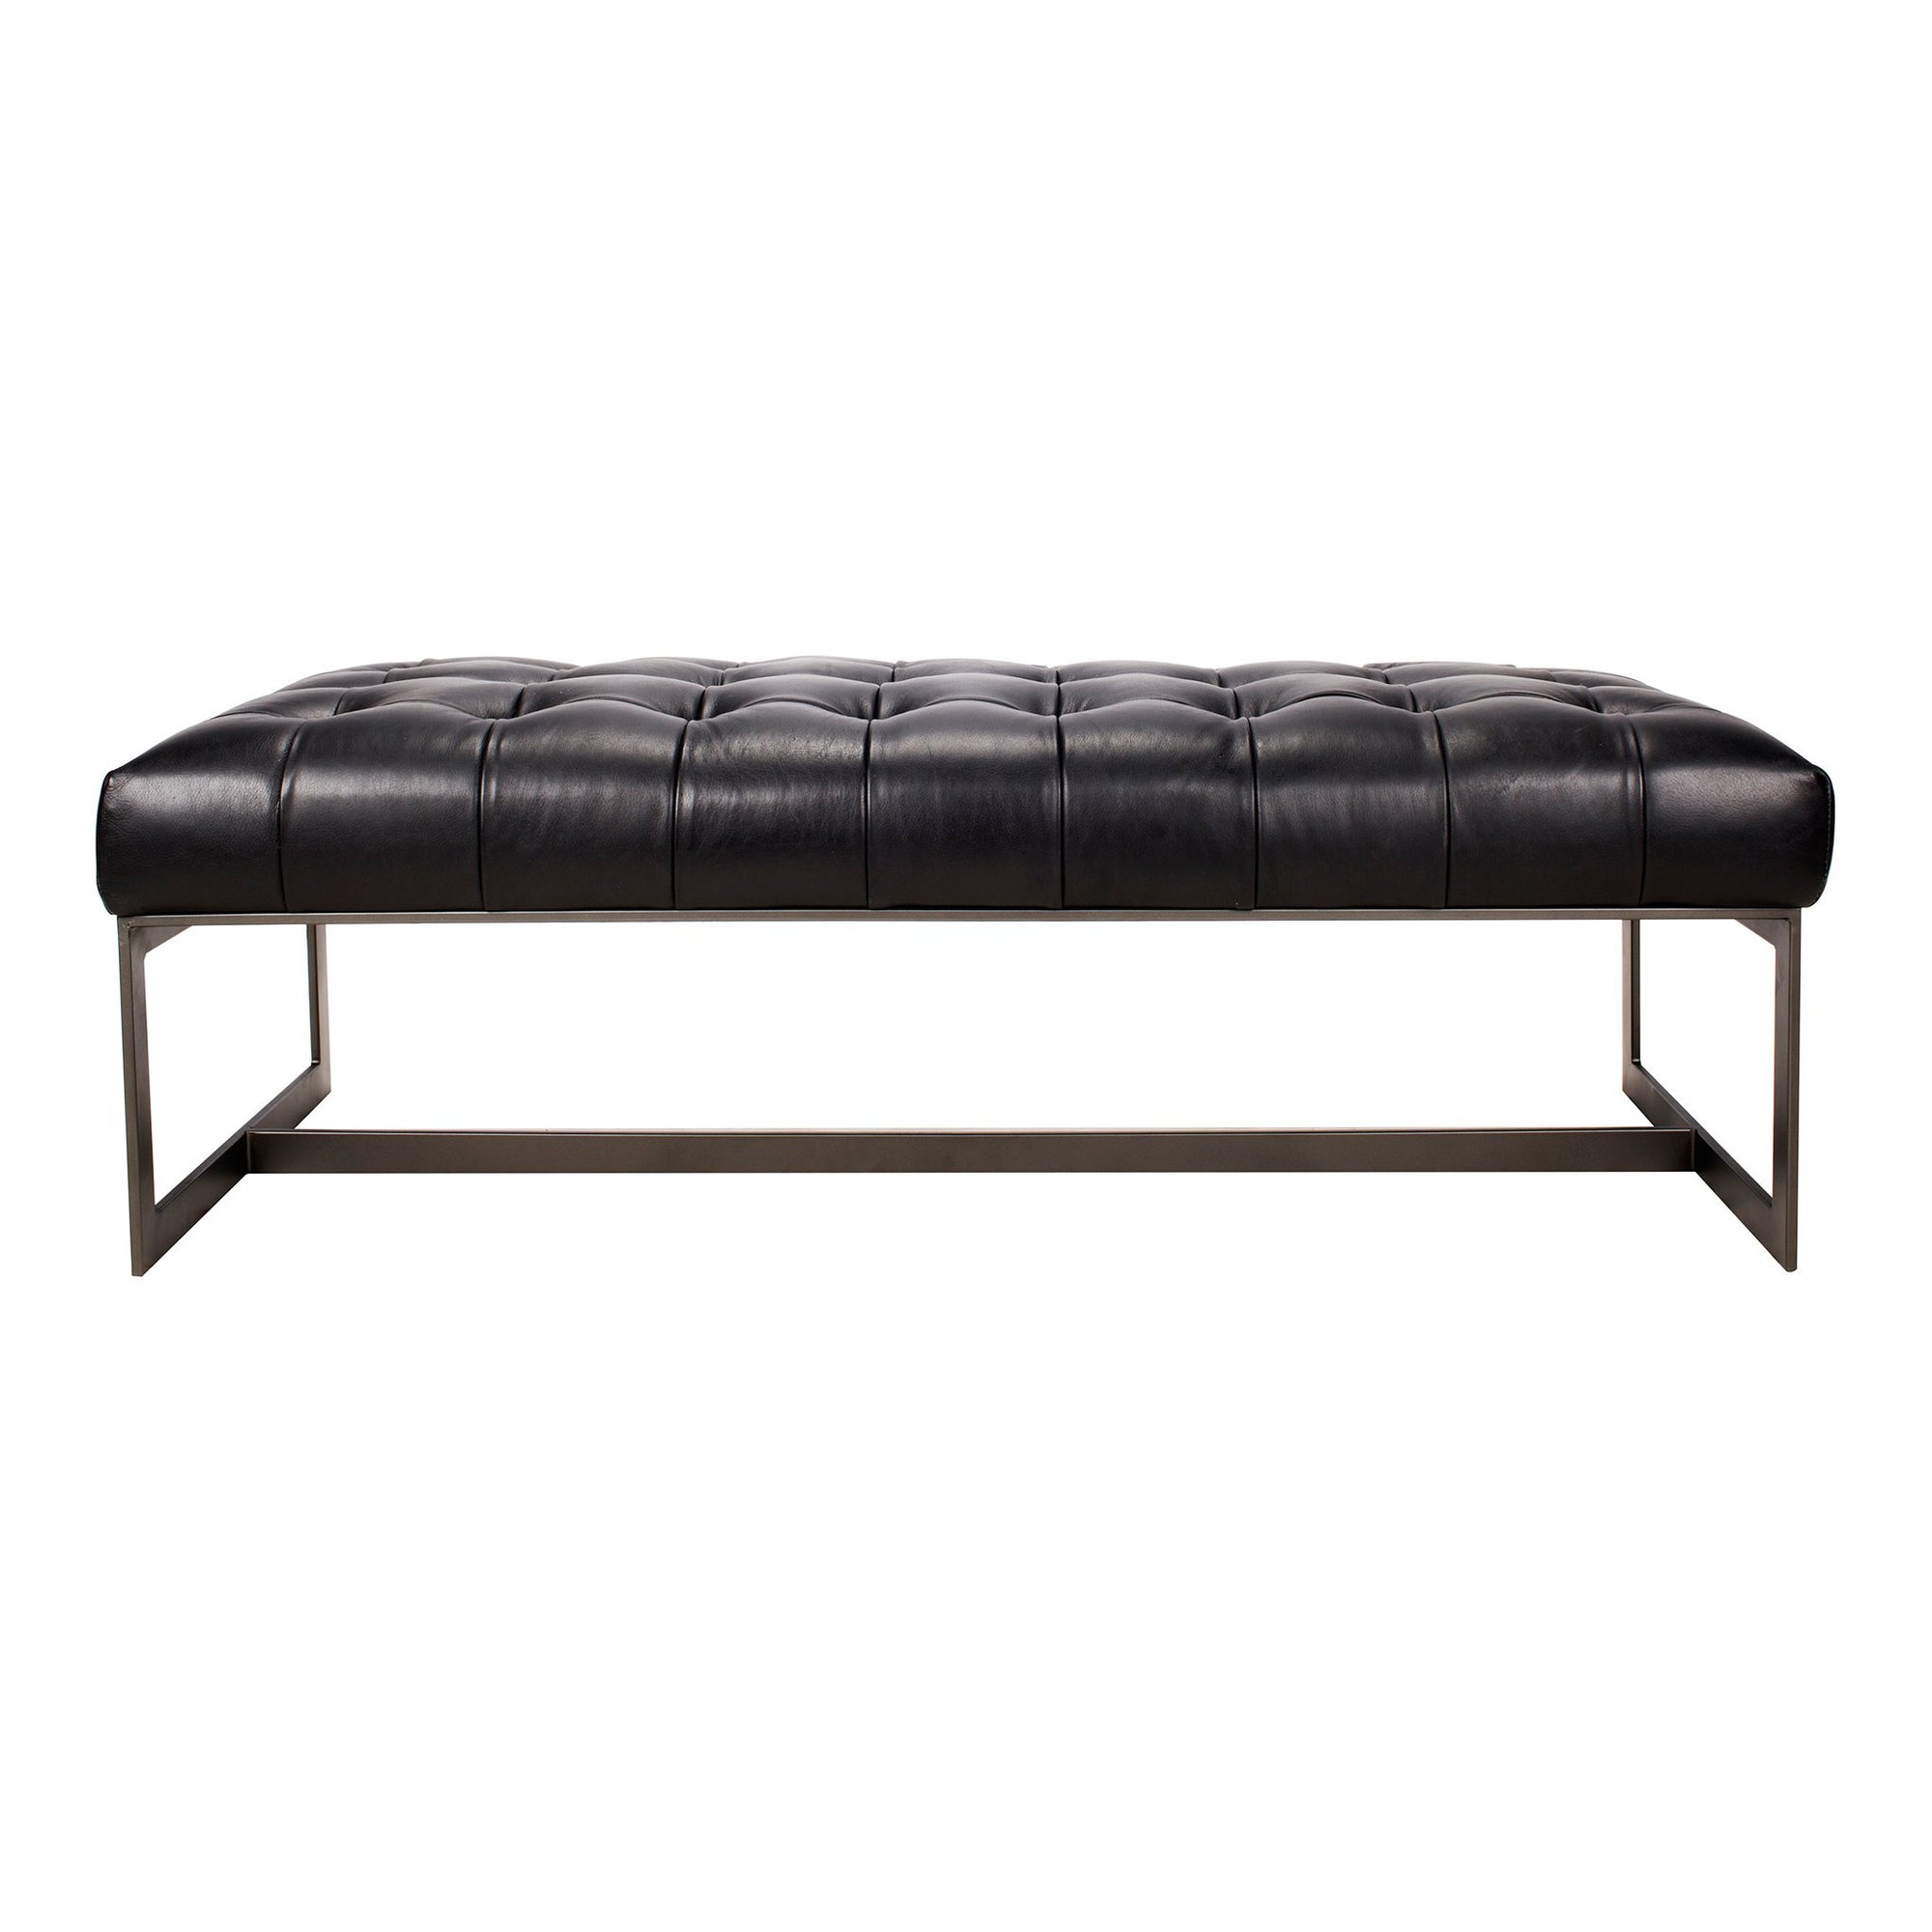 MOES-WYATT LEATHER BENCH-Benches-MODTEMPO